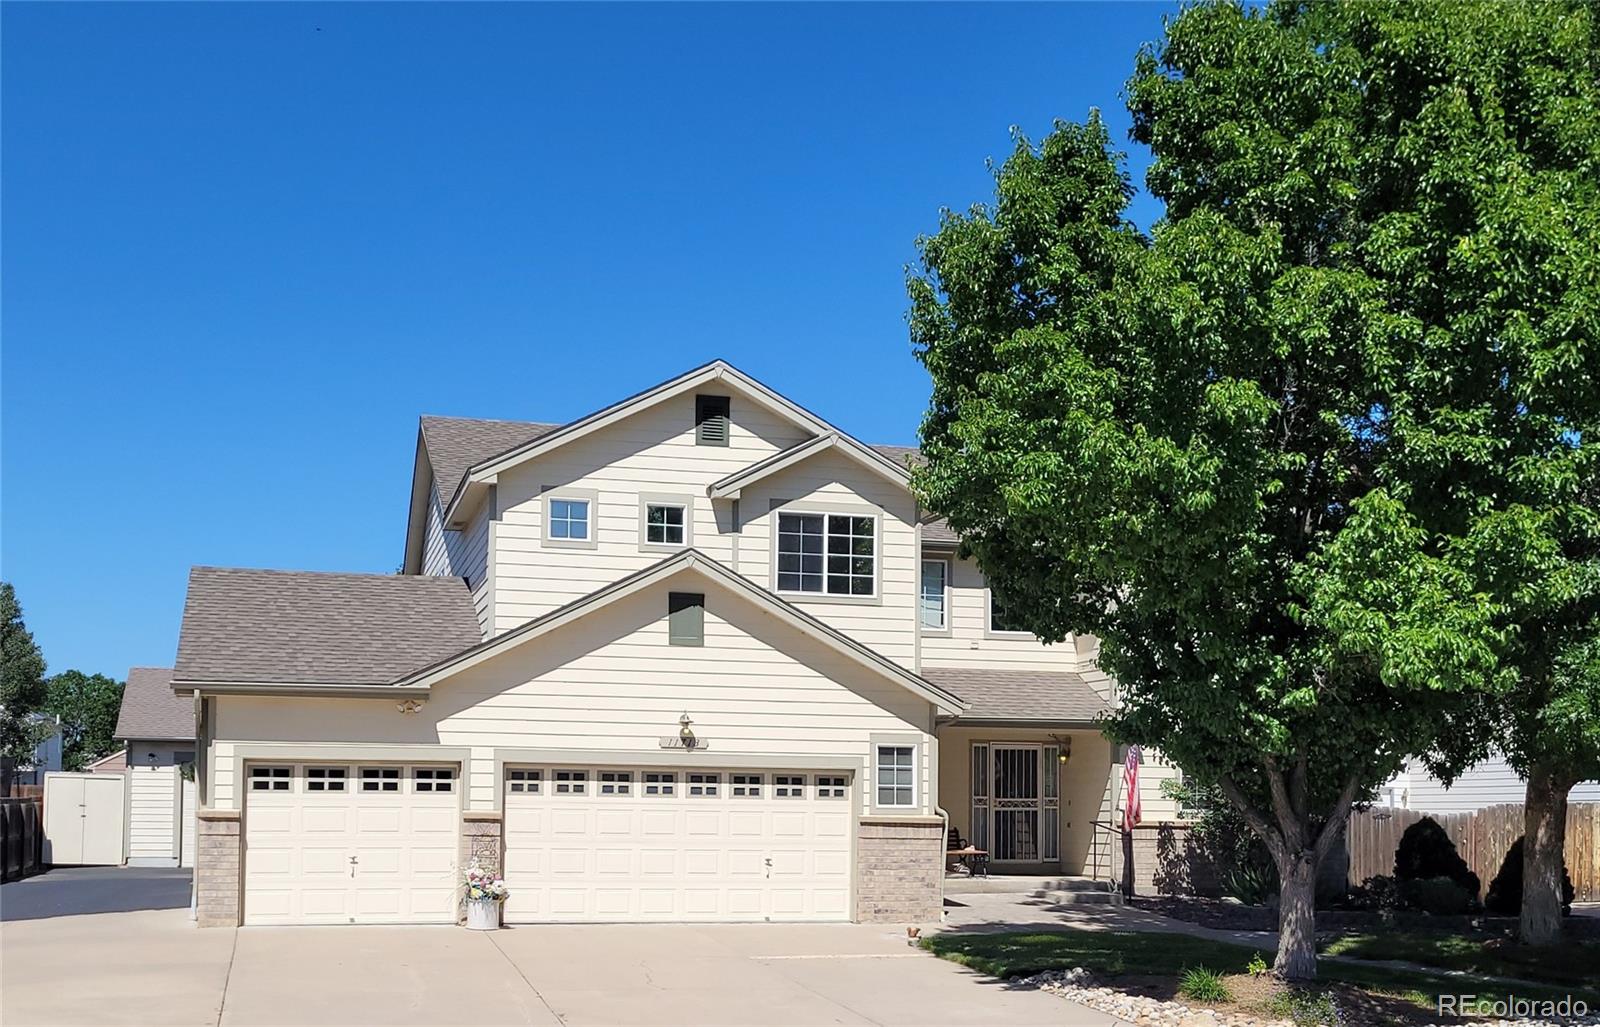 11713  paris street, commerce city sold home. Closed on 2024-04-12 for $775,000.